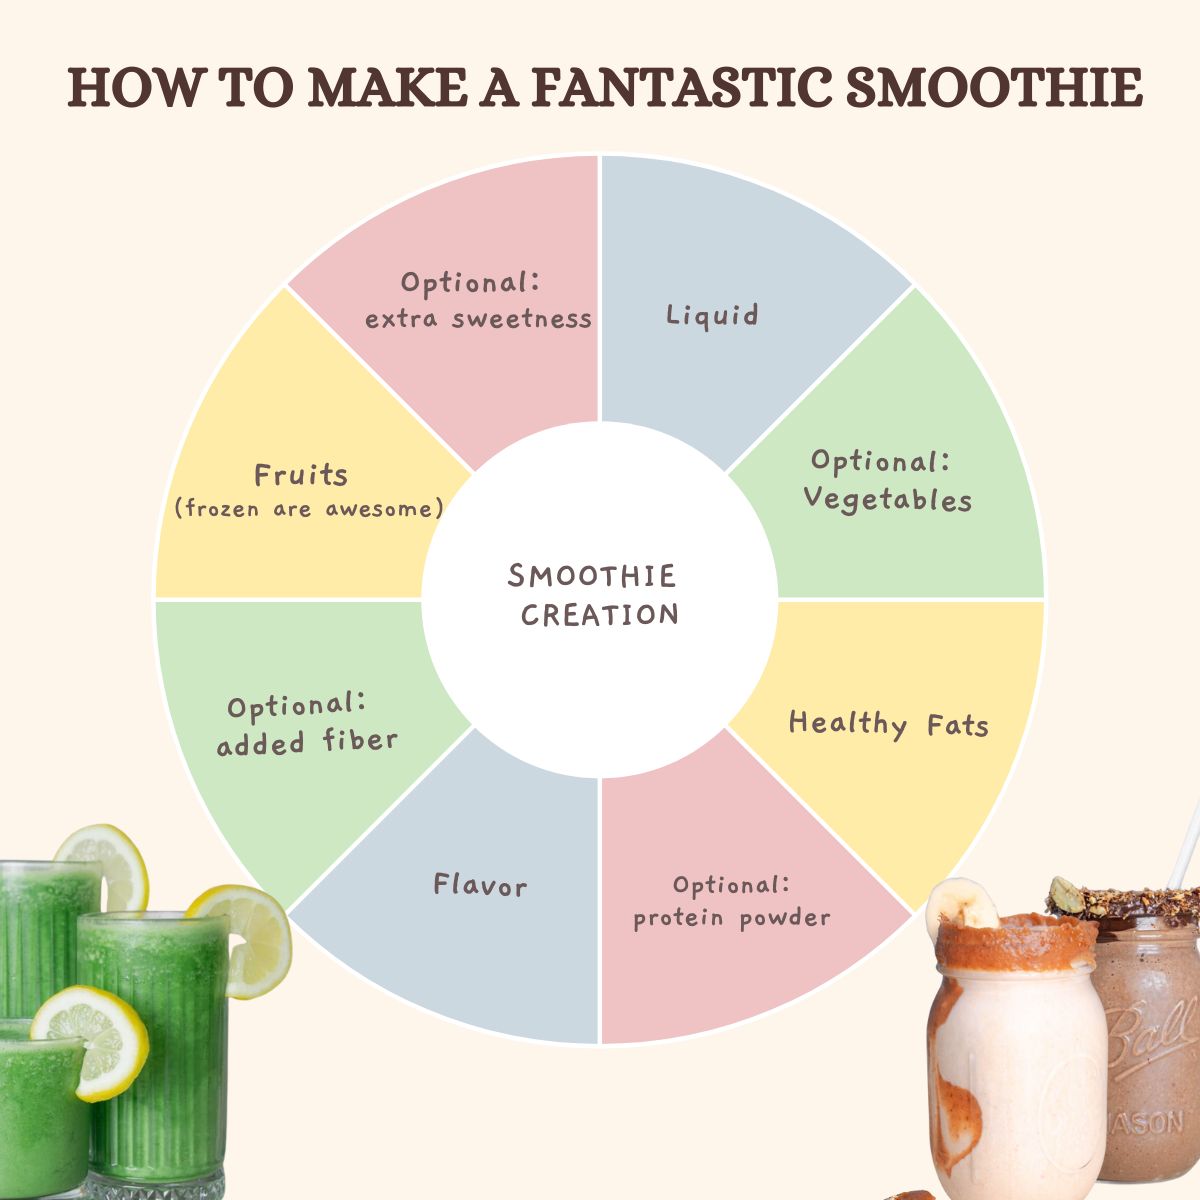 A wheel for how to make a fantastic smoothie with add in categories. In the bottom corners are several smoothies some green, one banana peanut butter, and another chocolate!